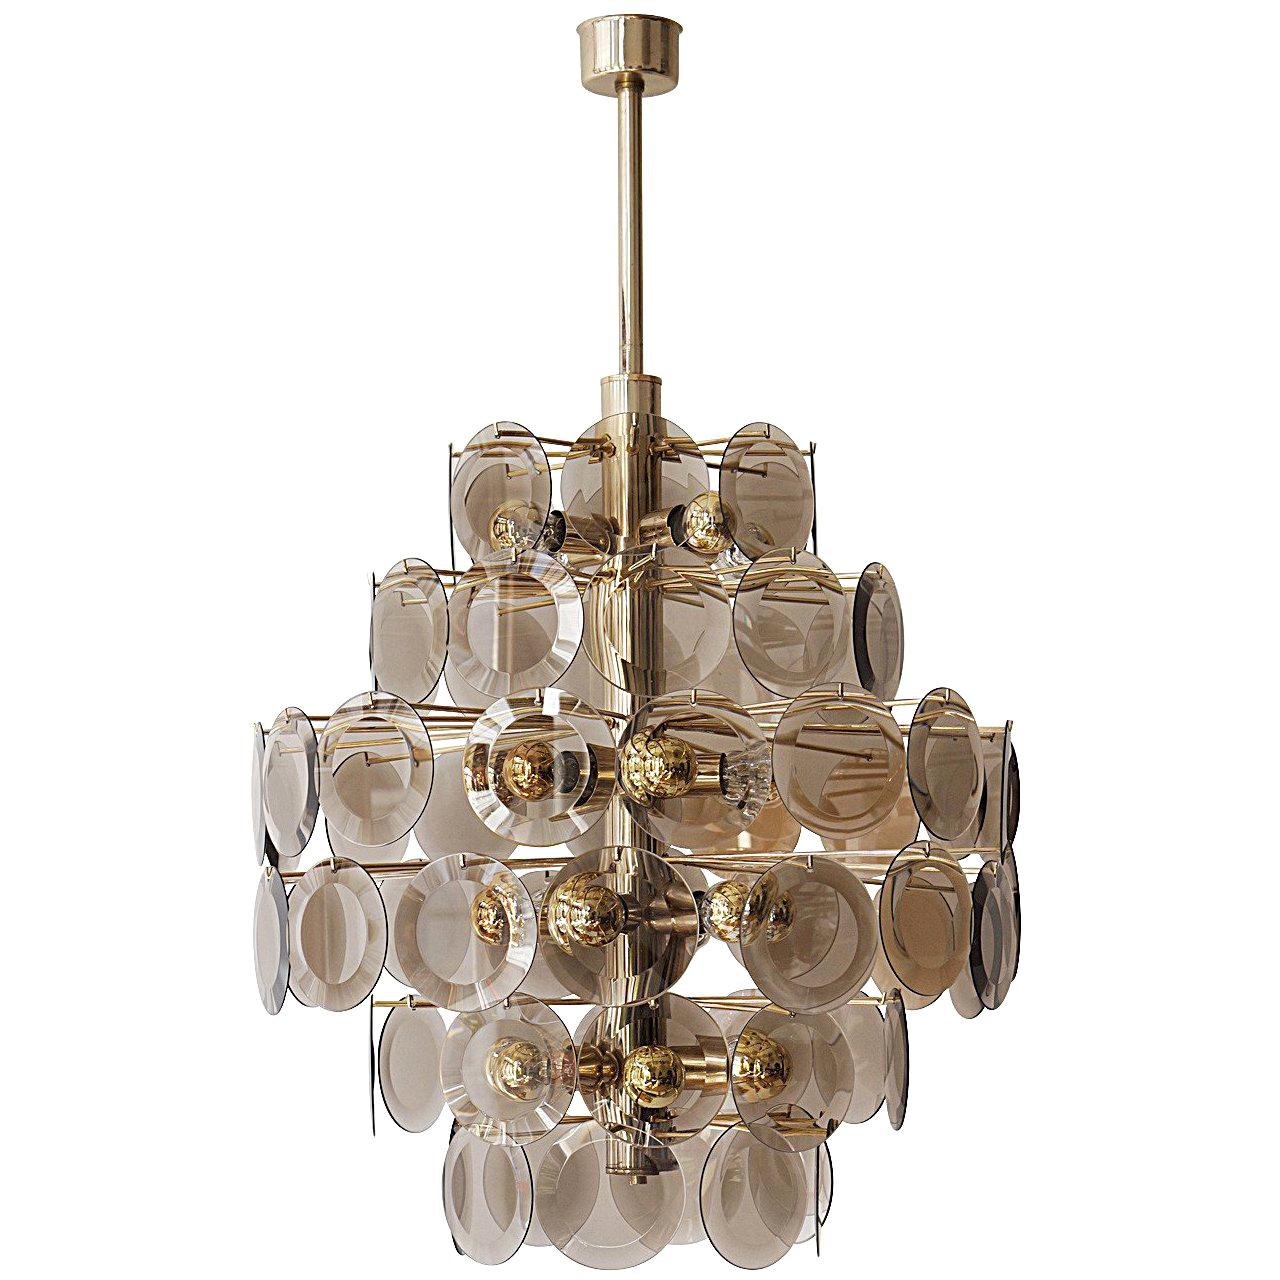 Large Murano Glass Chandelier with 71 Murano Glass Discs